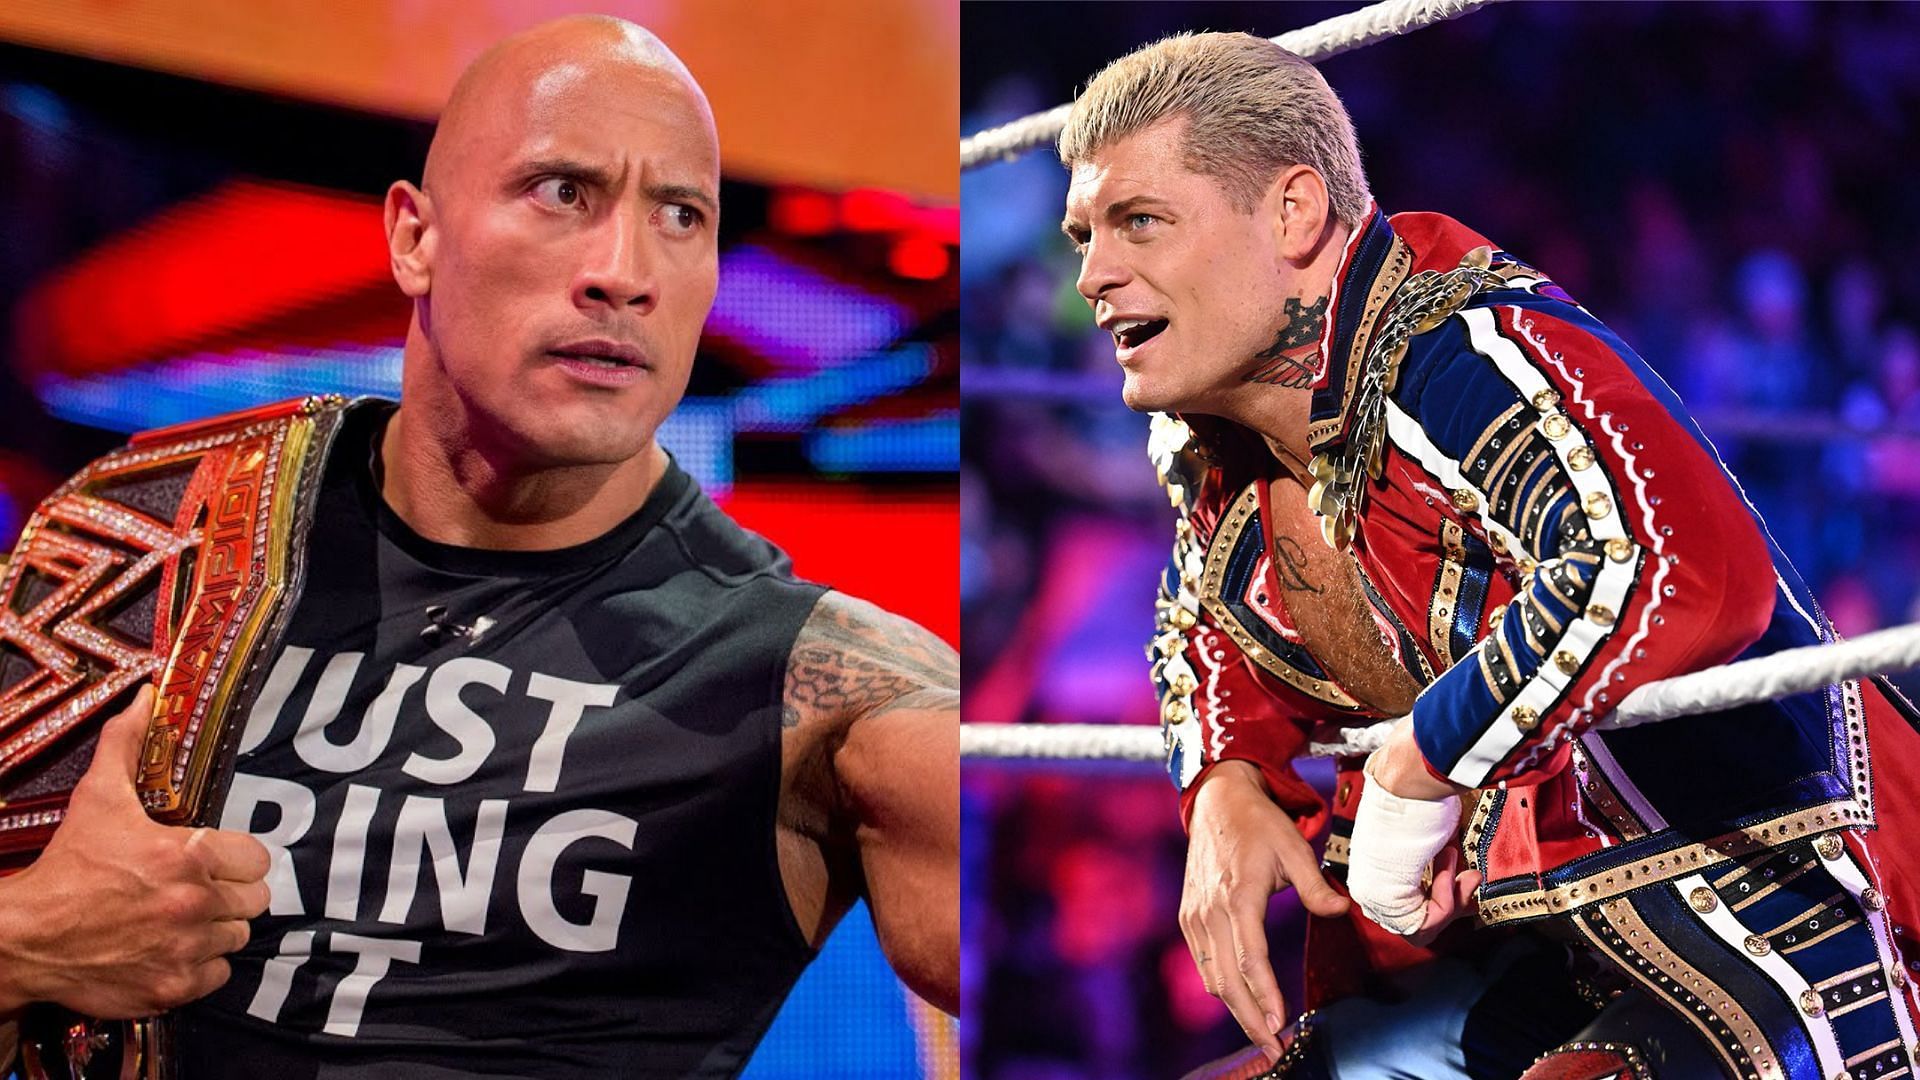 The Rock and Cody Rhodes have an ensuing battle in the Royal Rumble odds